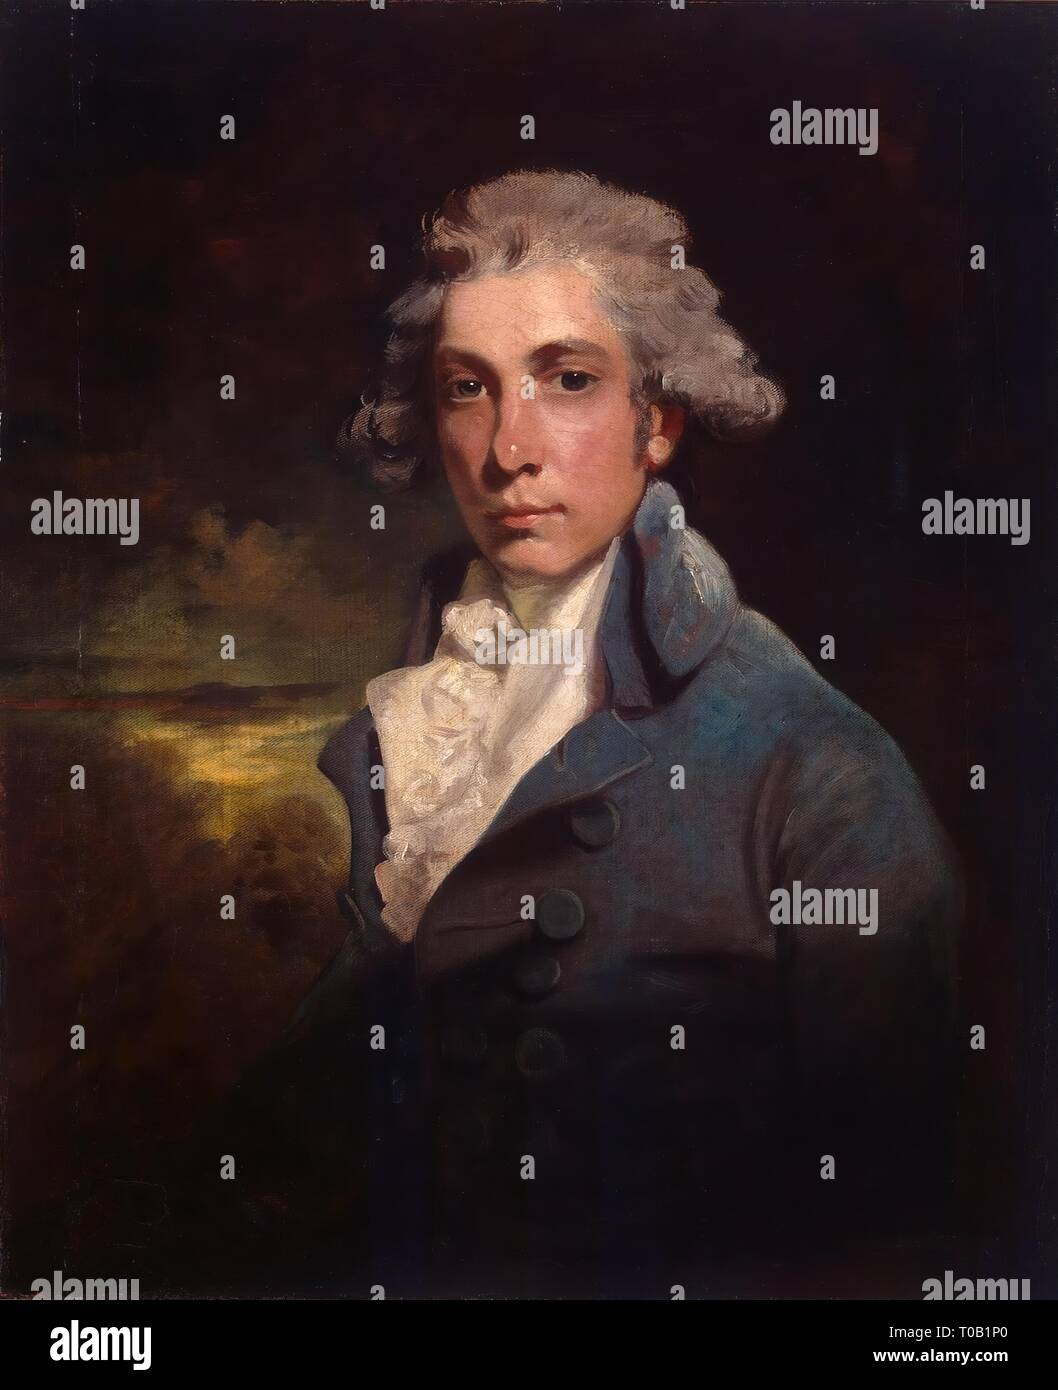 'Portrait of Richard Brinsley Sheridan (1751-1816)'. Great Britain, Late 1780s - early 1790s. Dimensions: 77x64,5 cm. Museum: State Hermitage, St. Petersburg. Author: JOHN HOPPNER. Stock Photo